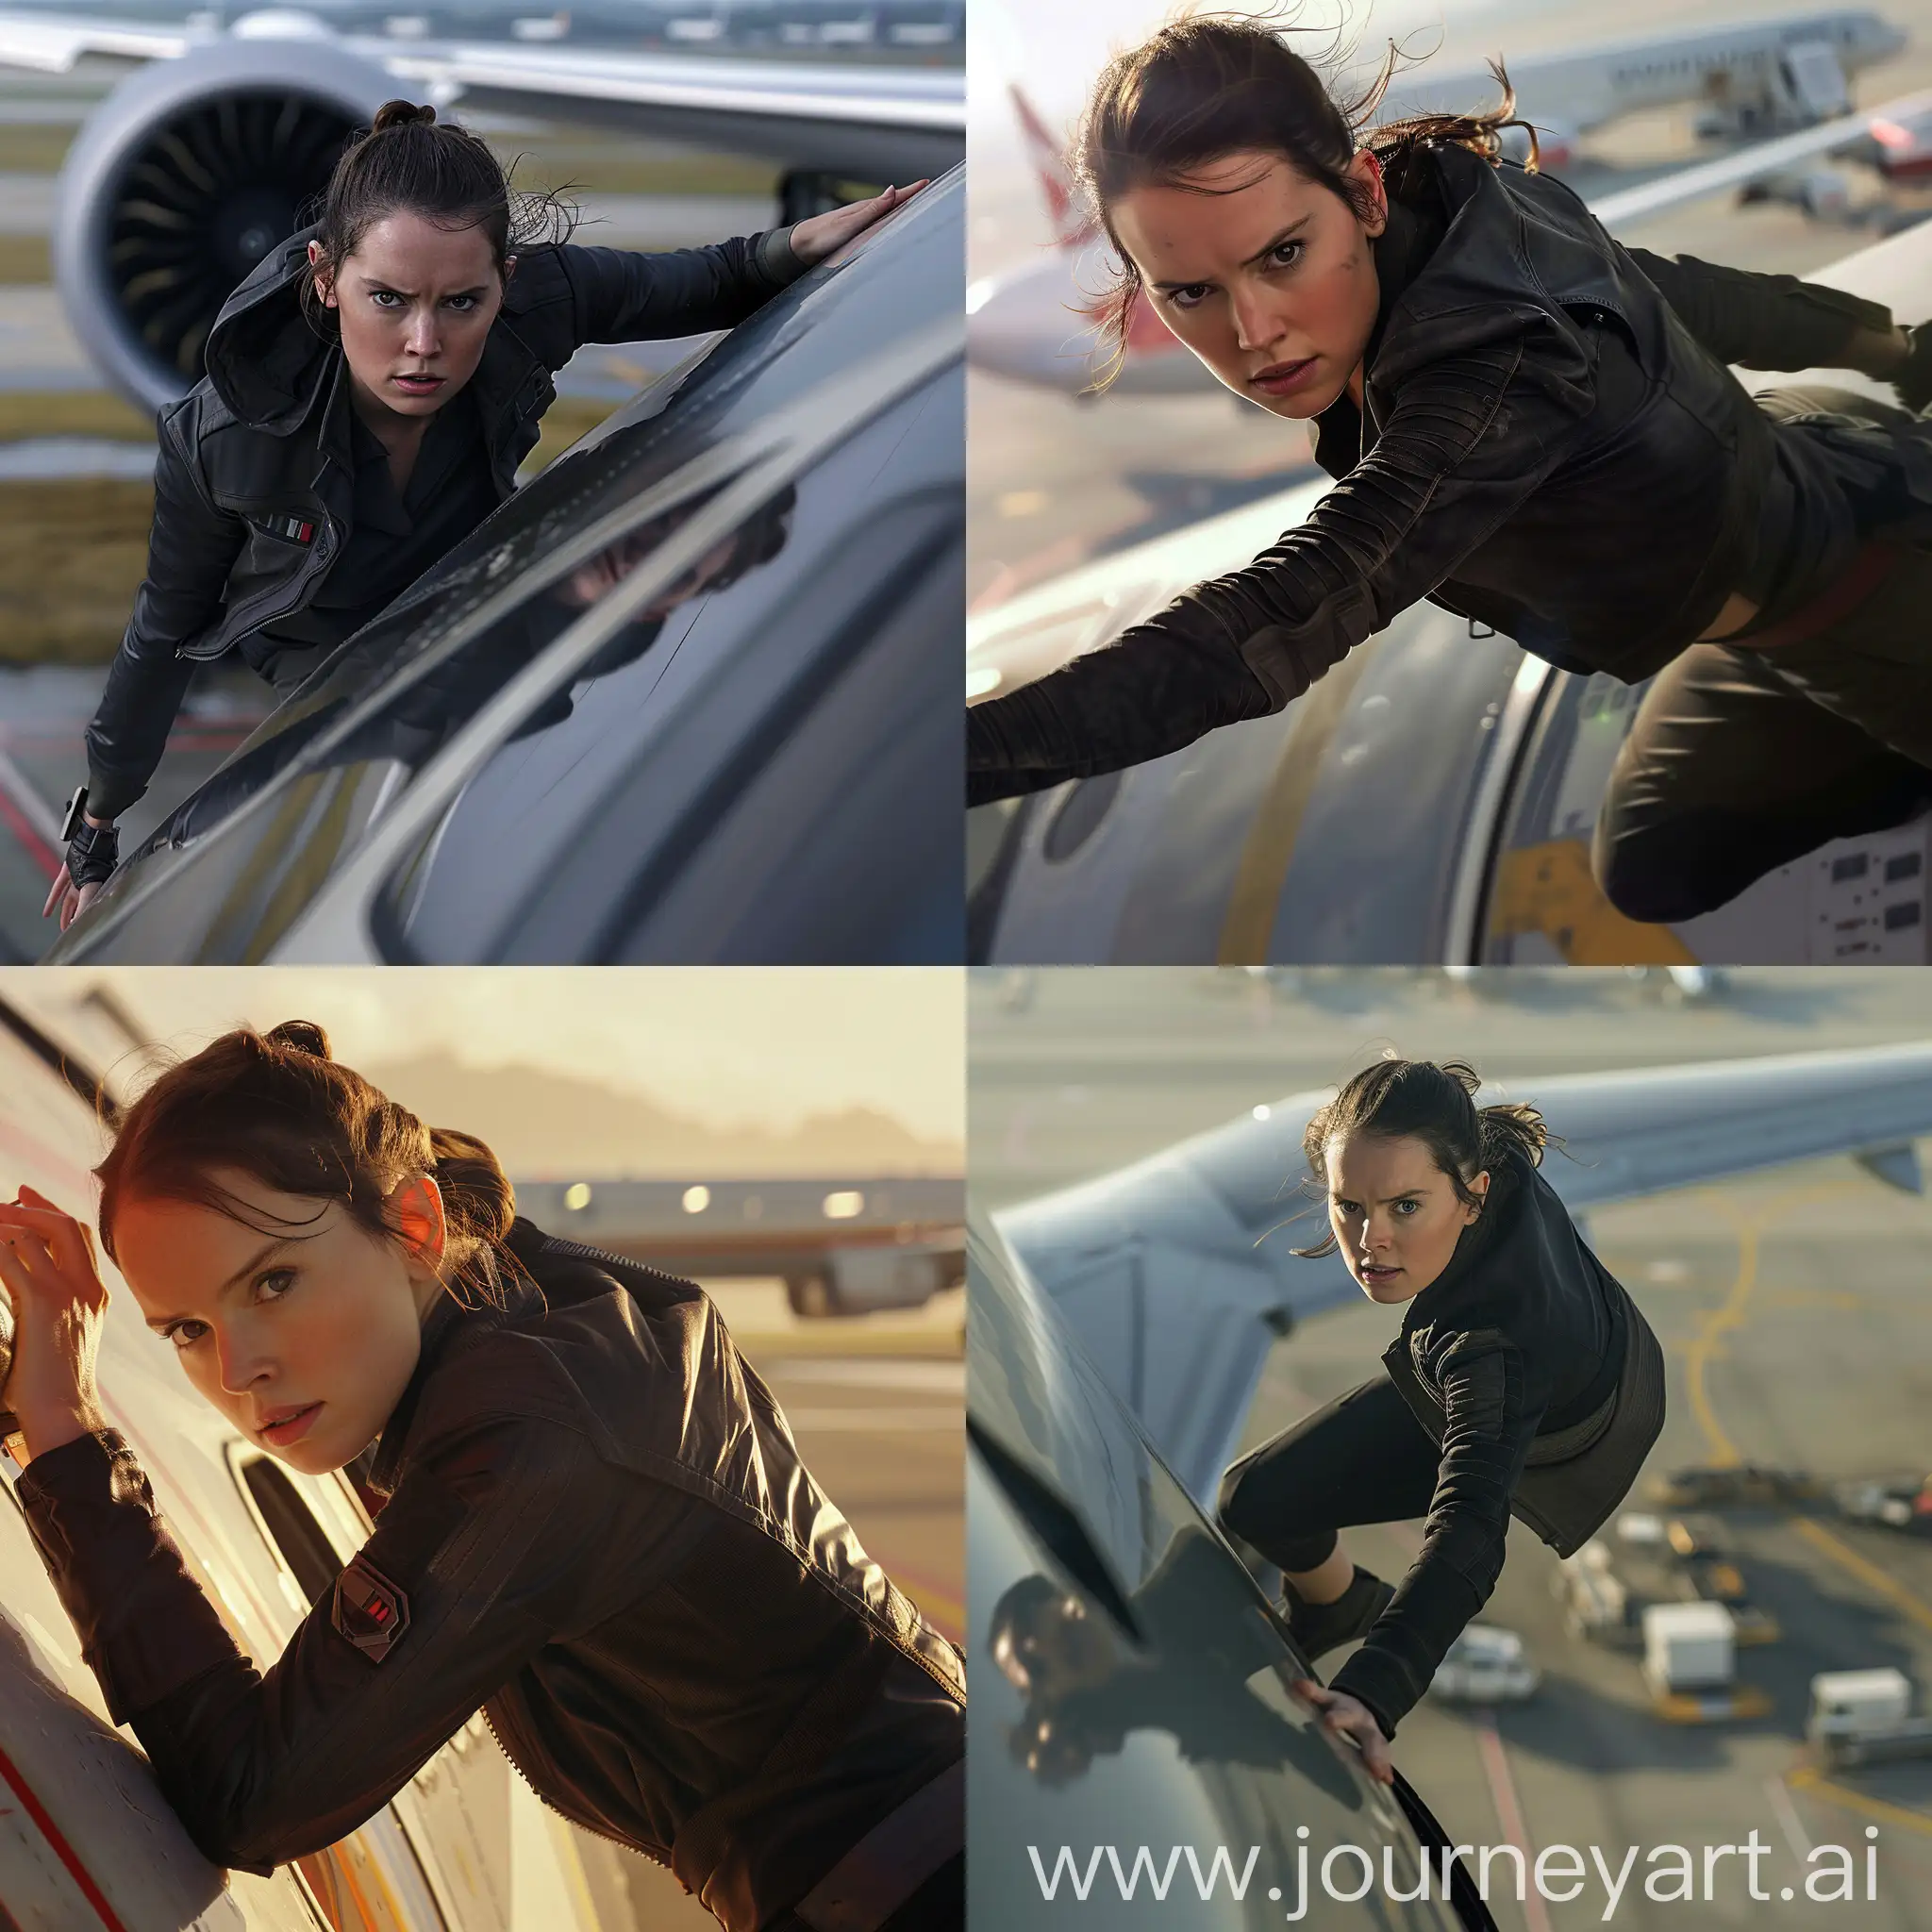 actress Daisy Ridley With Rey Skywalker's face, With Black jacket in The Movie Mission Impossible. she is hanging on the wing of a moving plane at the airport, in a dangerous scene of action, in 8k resolution